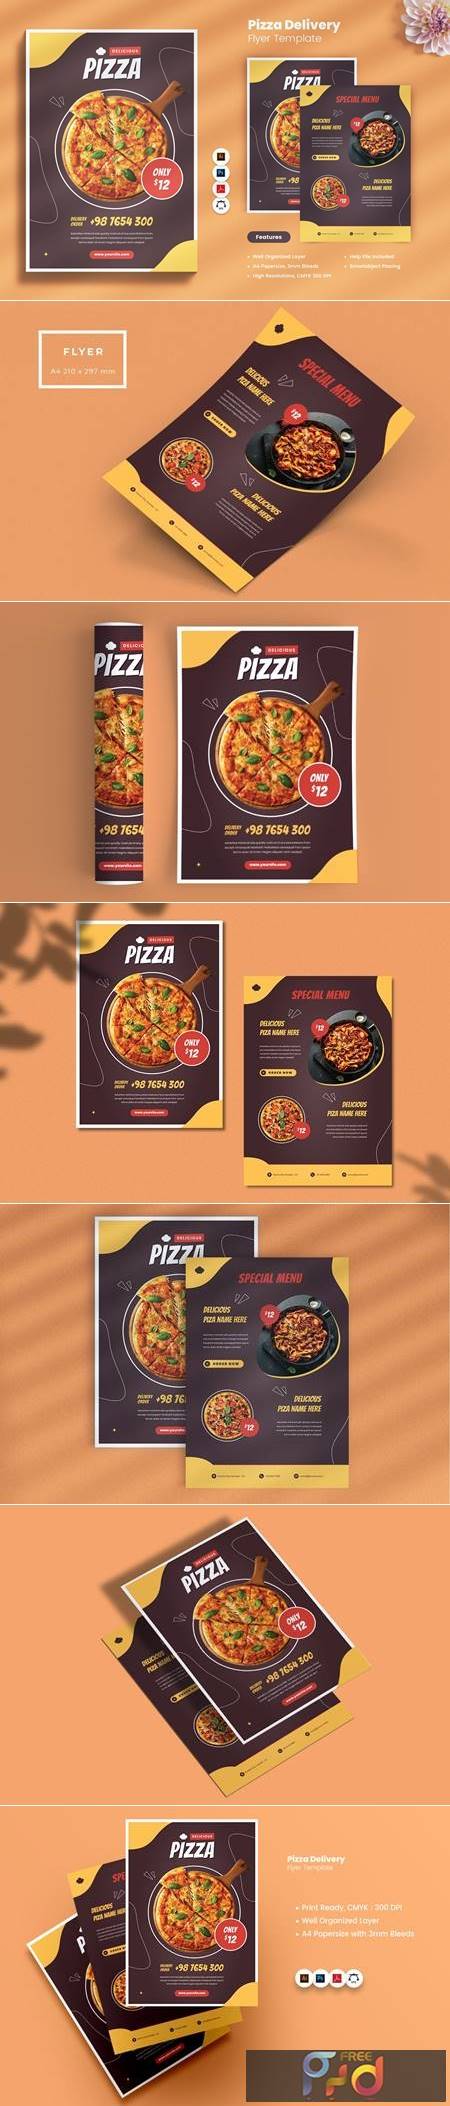 Pizza Delivery Order Flyer LUSV2QU 1